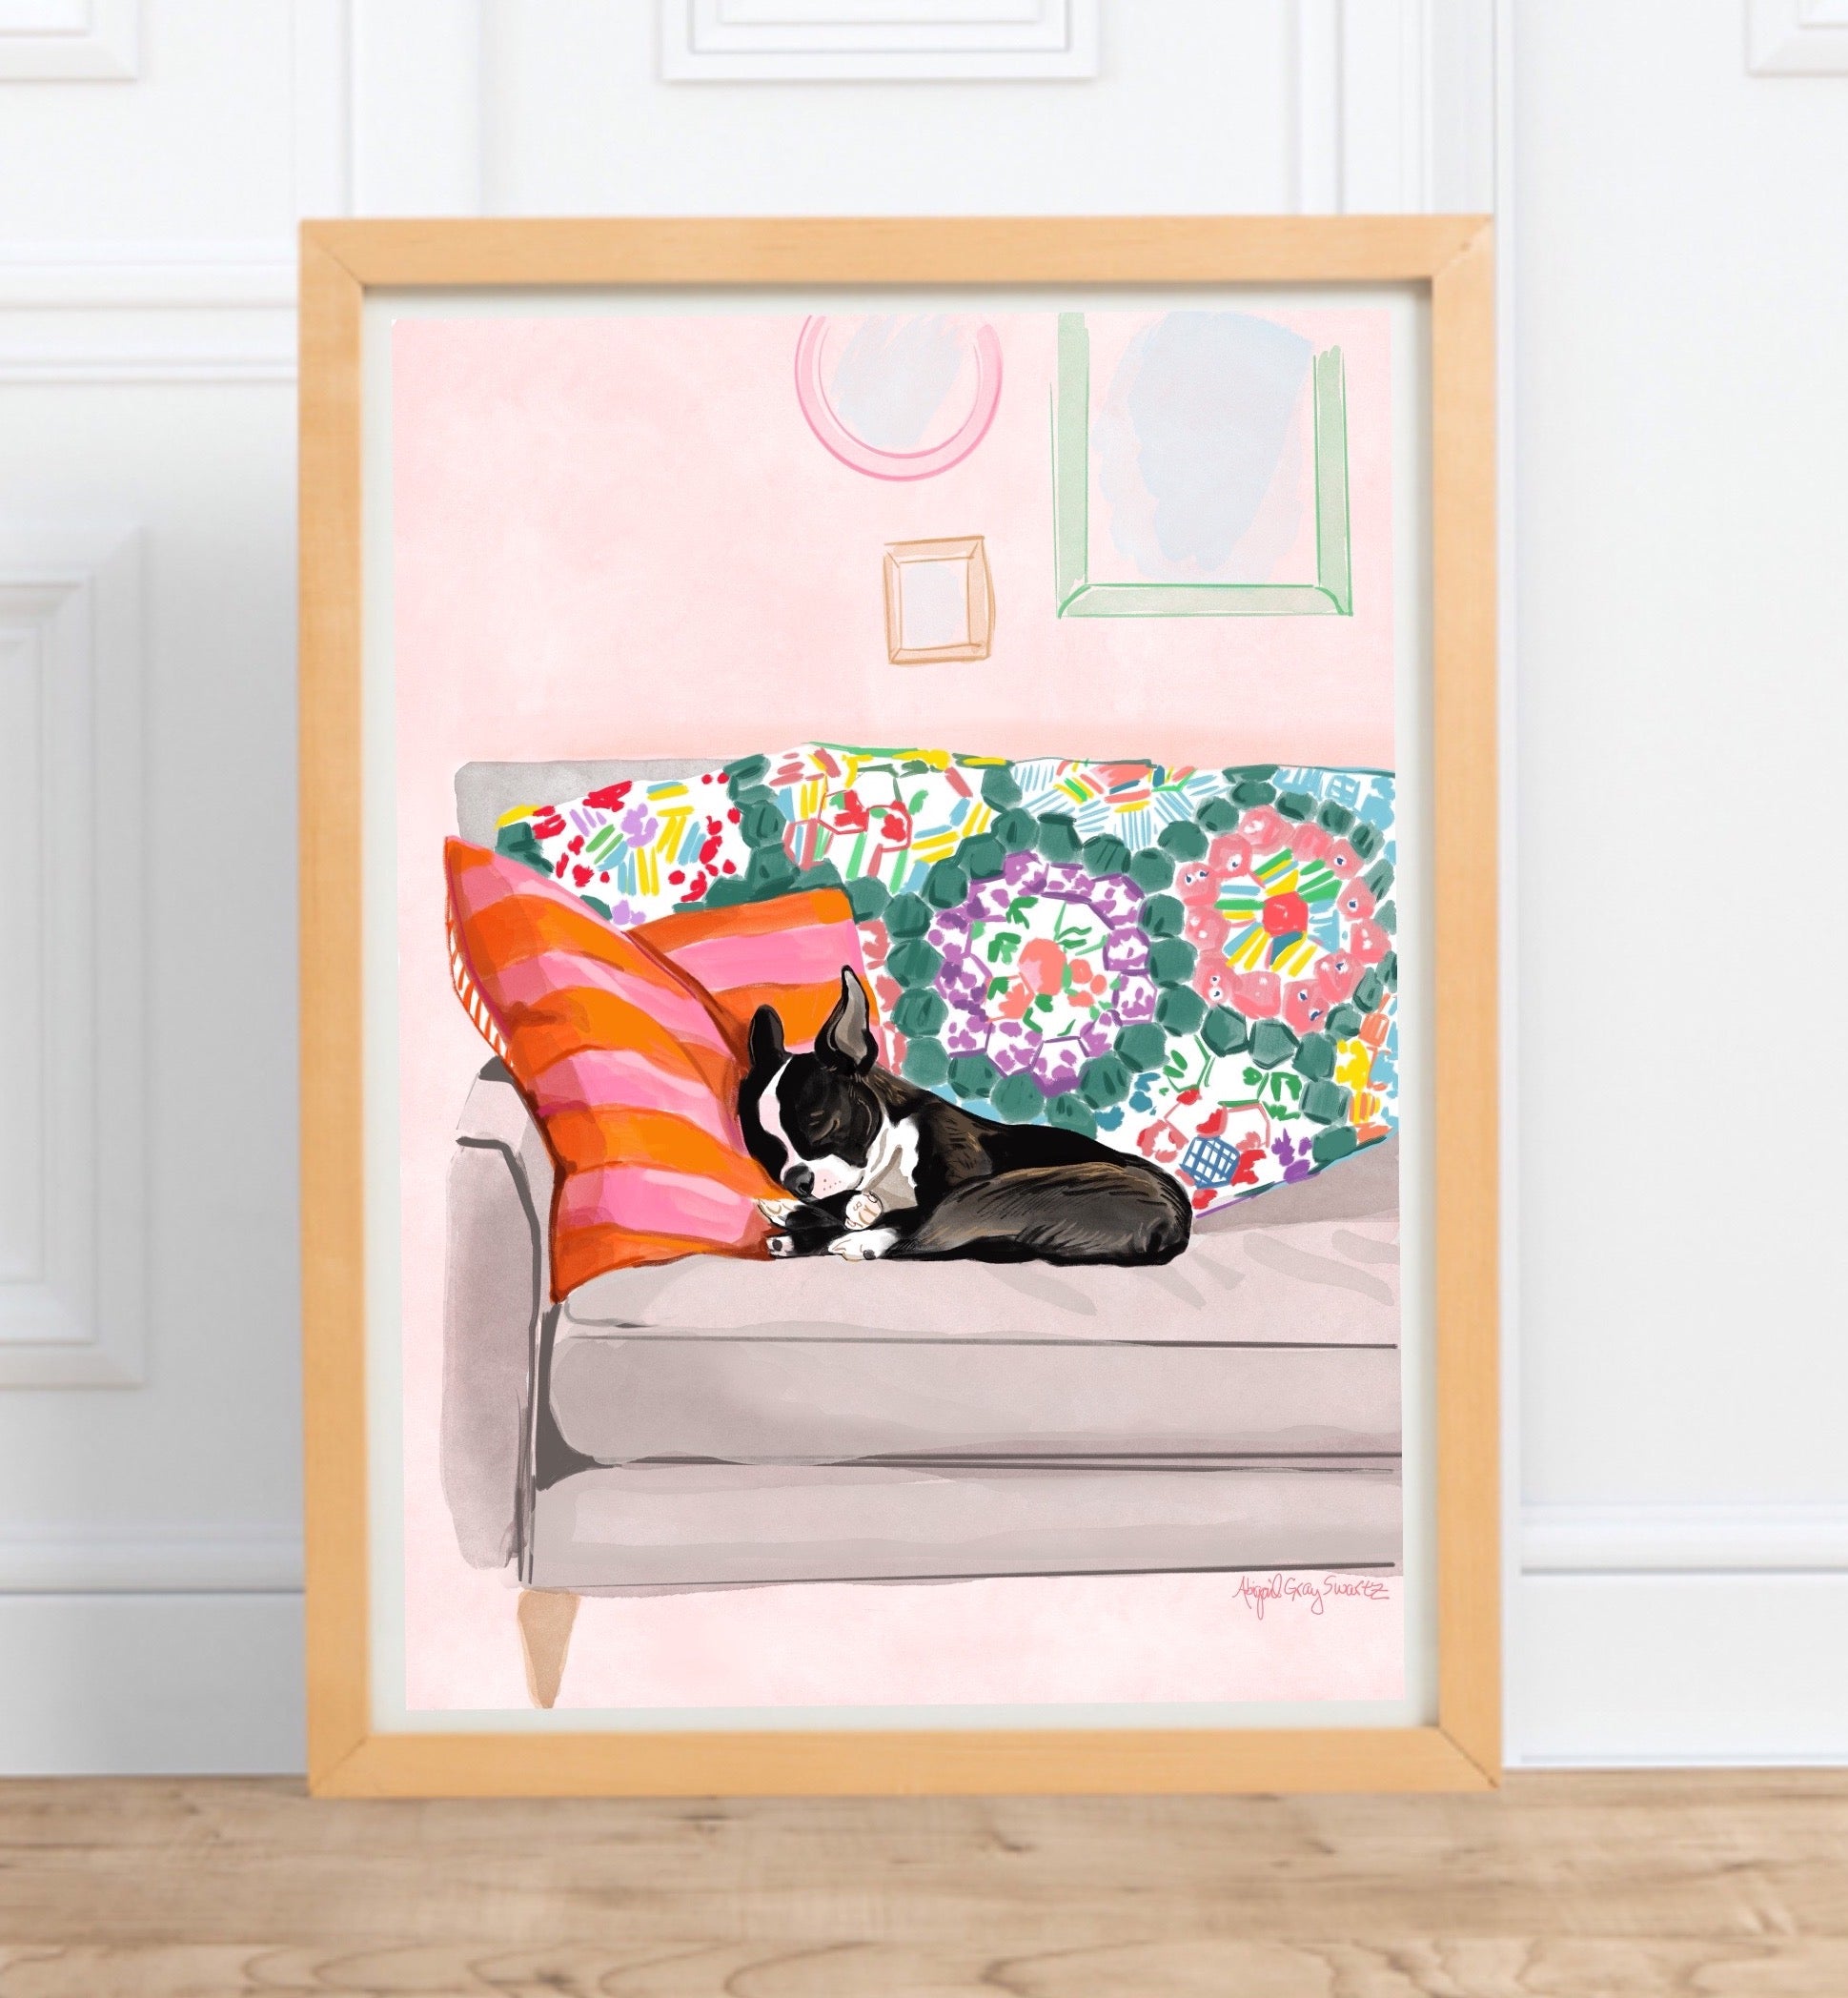 Puppy naps print, boston terrier napping on a sofa in a pink living room with colorful quilt and textiles. Artwork made in Maine by Abigail Gray Swartz